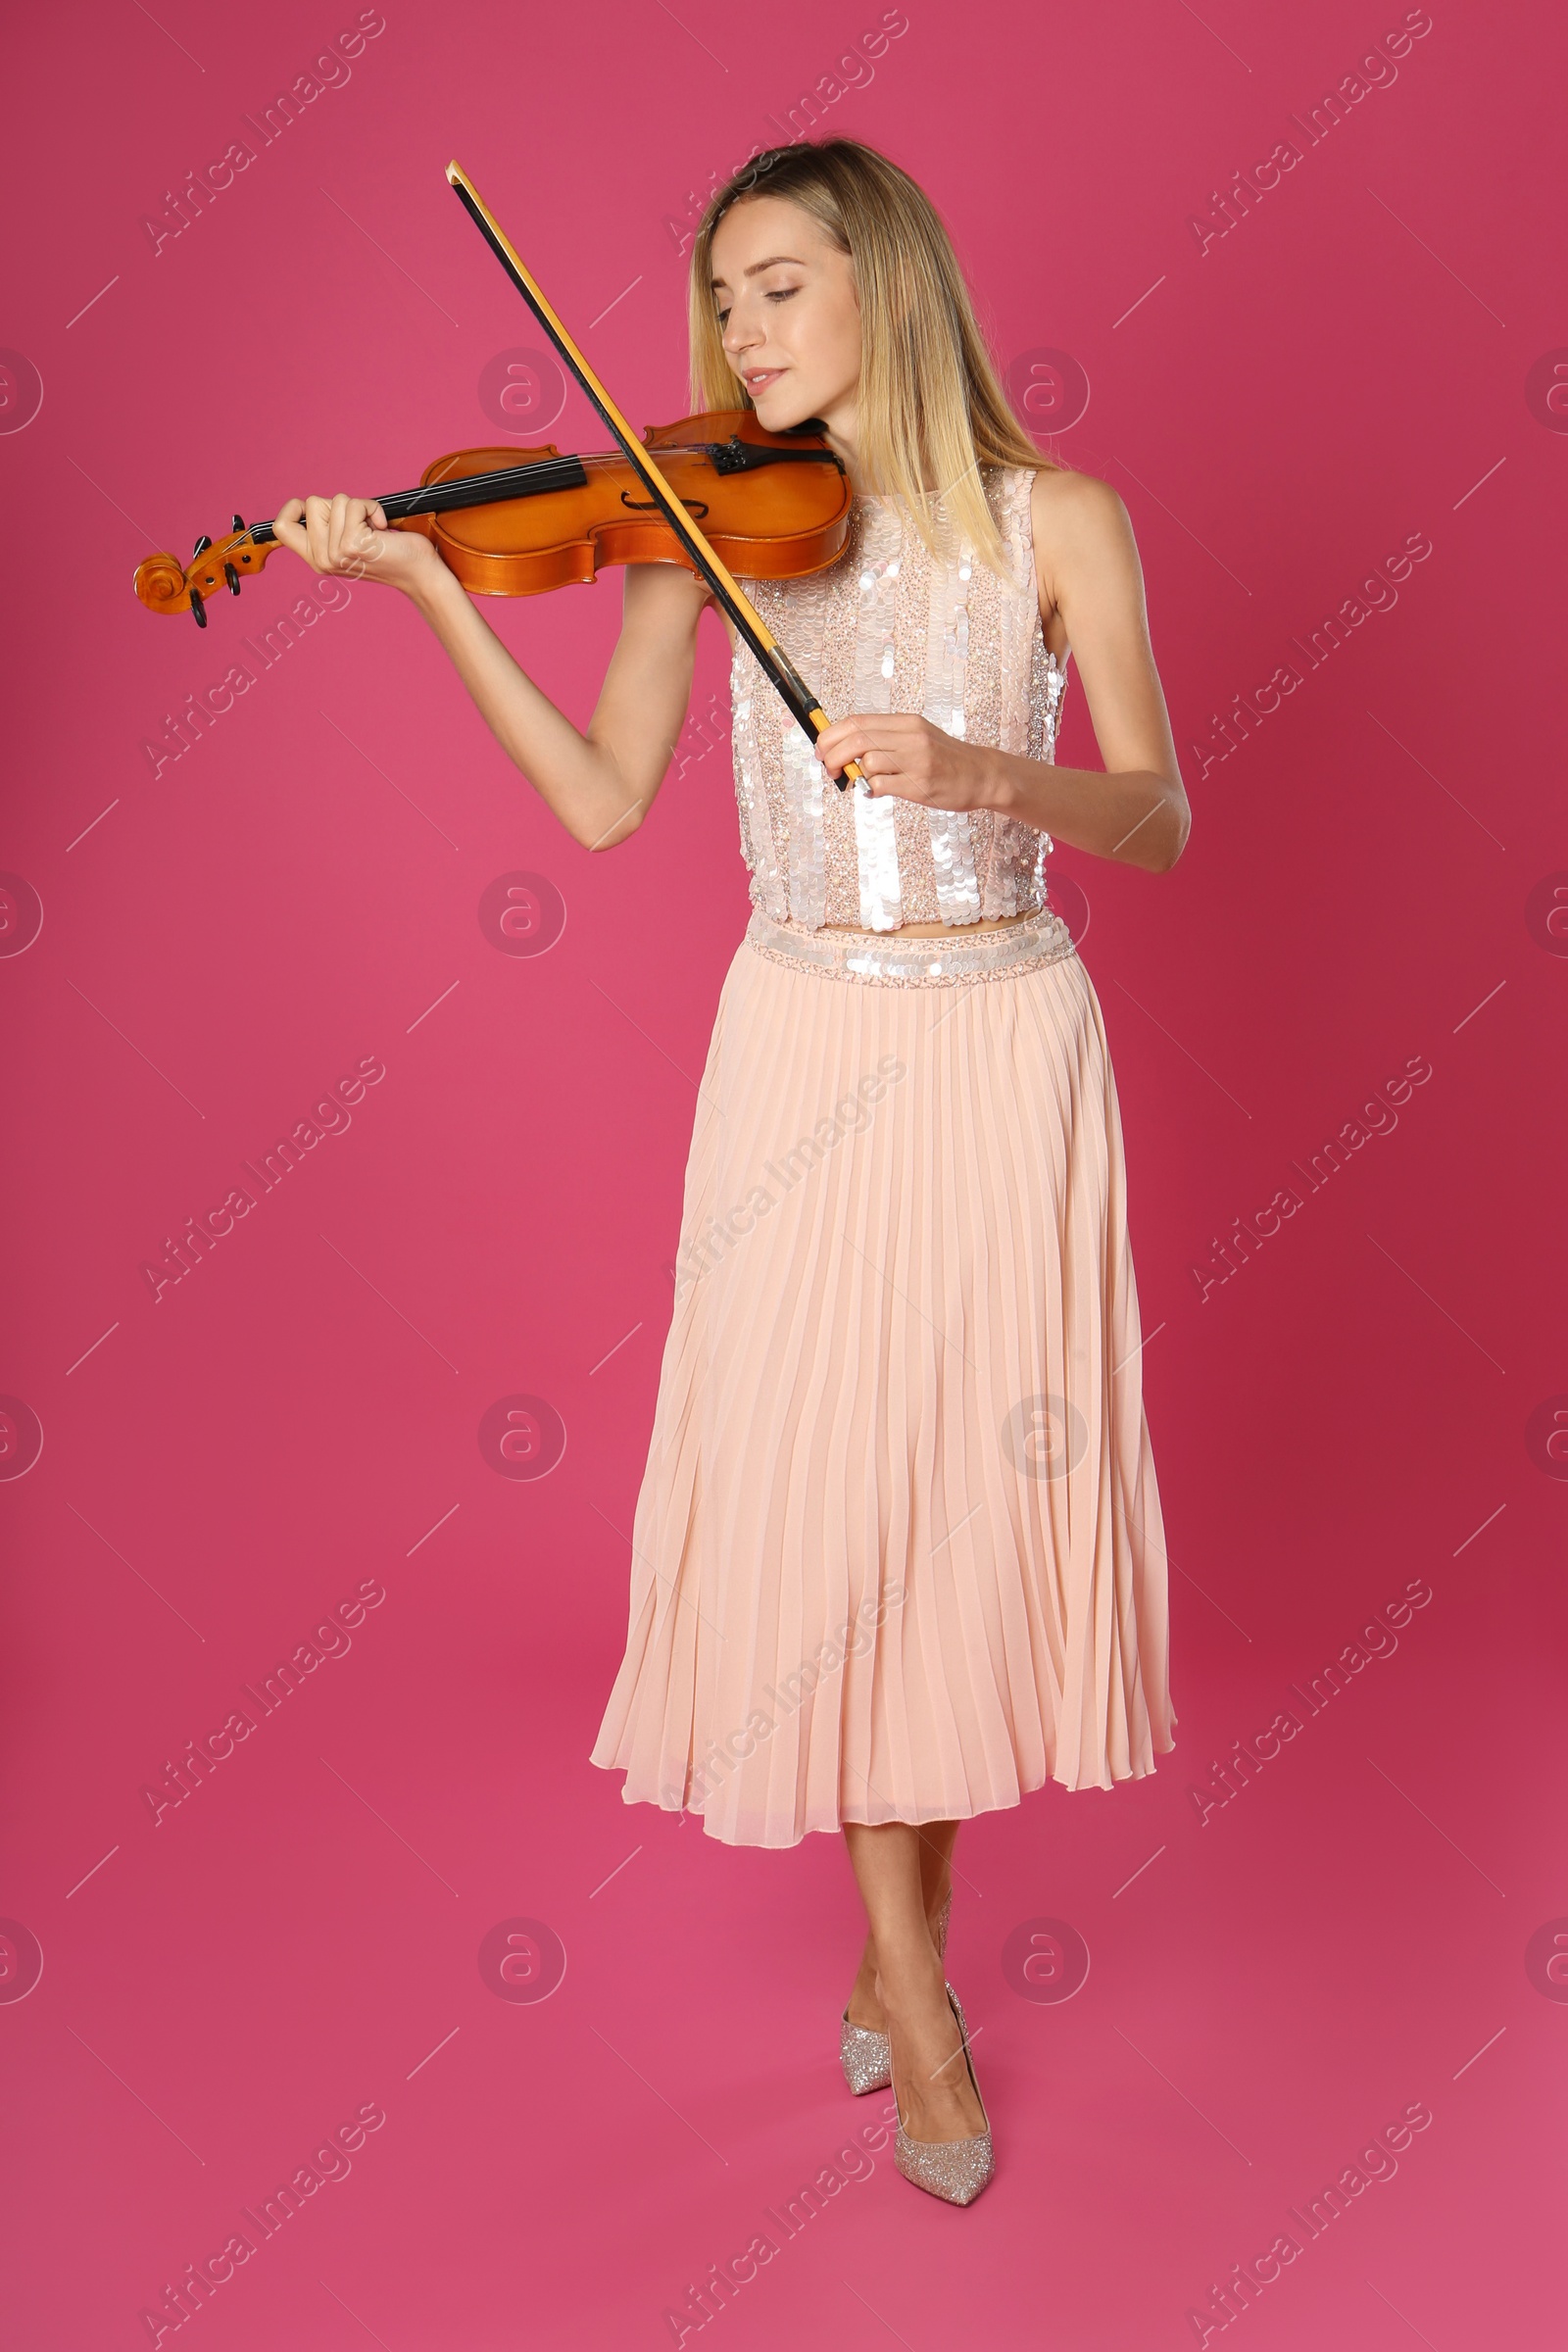 Photo of Beautiful woman playing violin on pink background